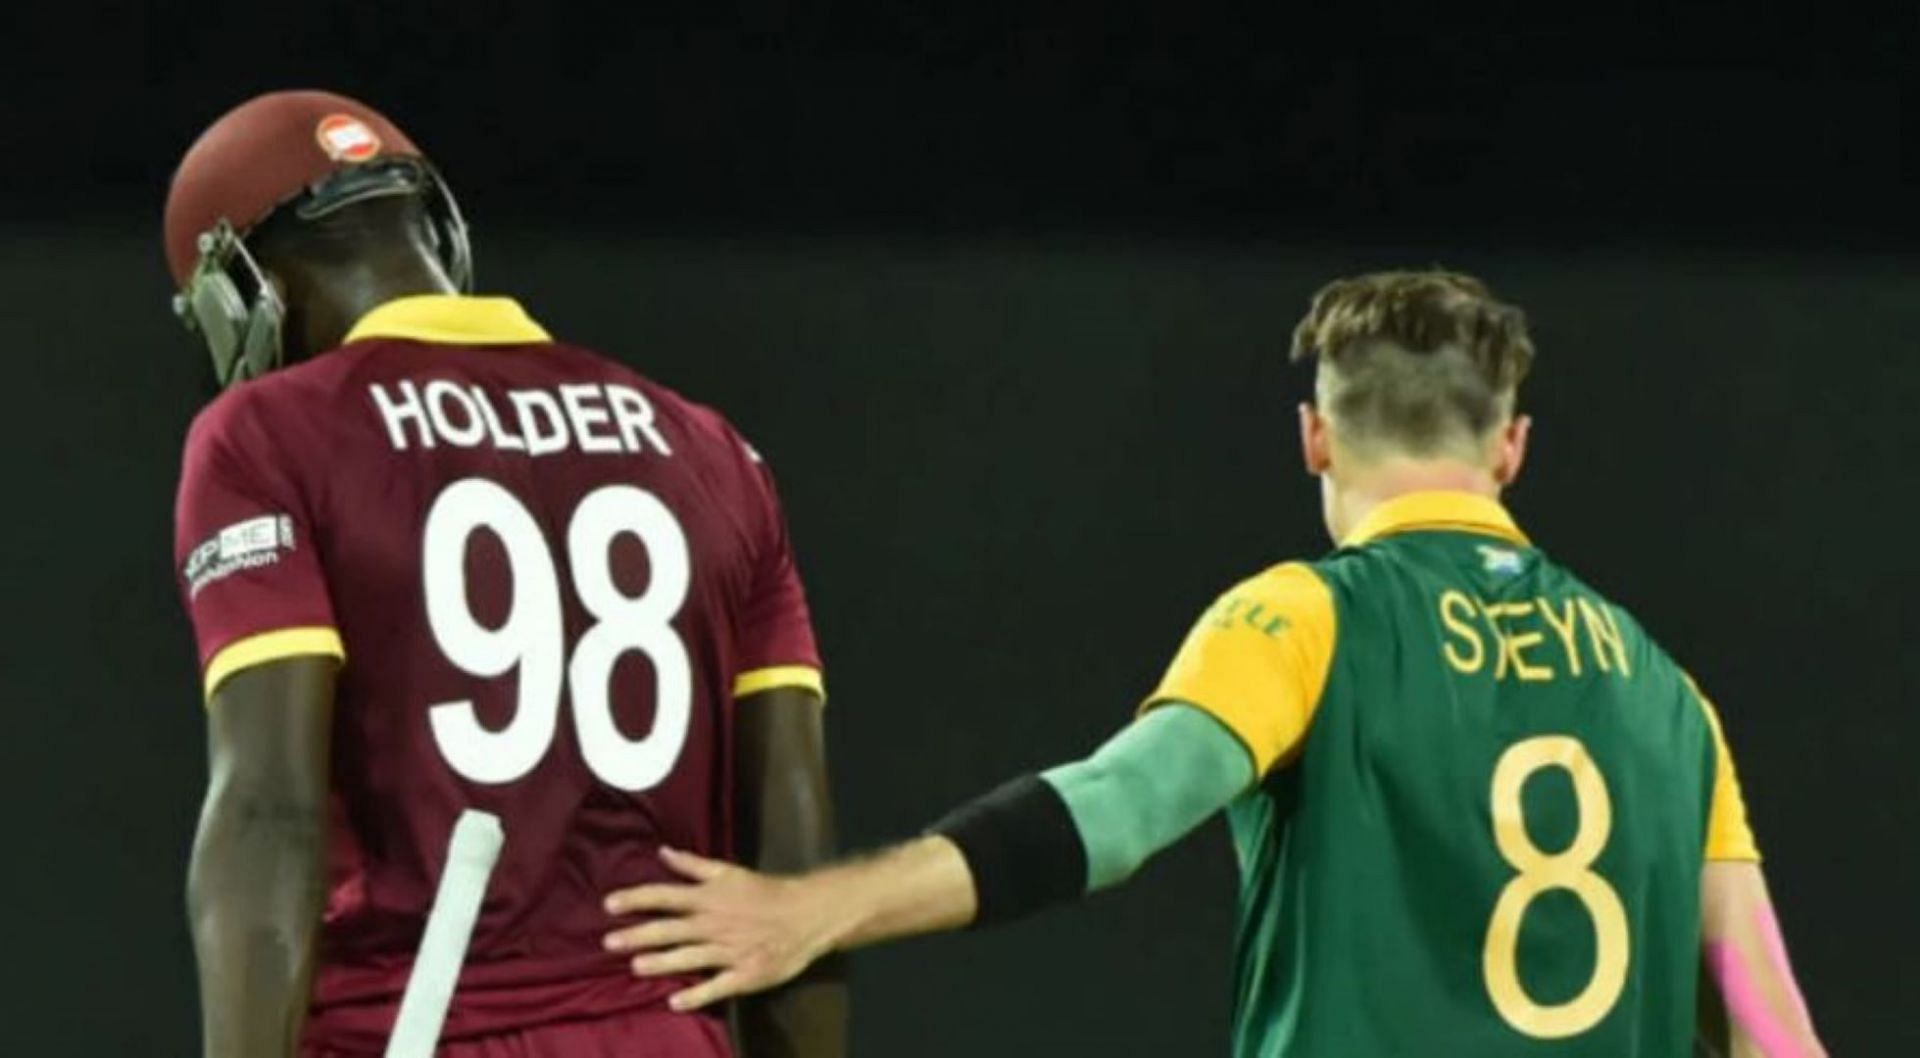 Dale Steyn pats Jason Holder for his half-century under trying circumstances.